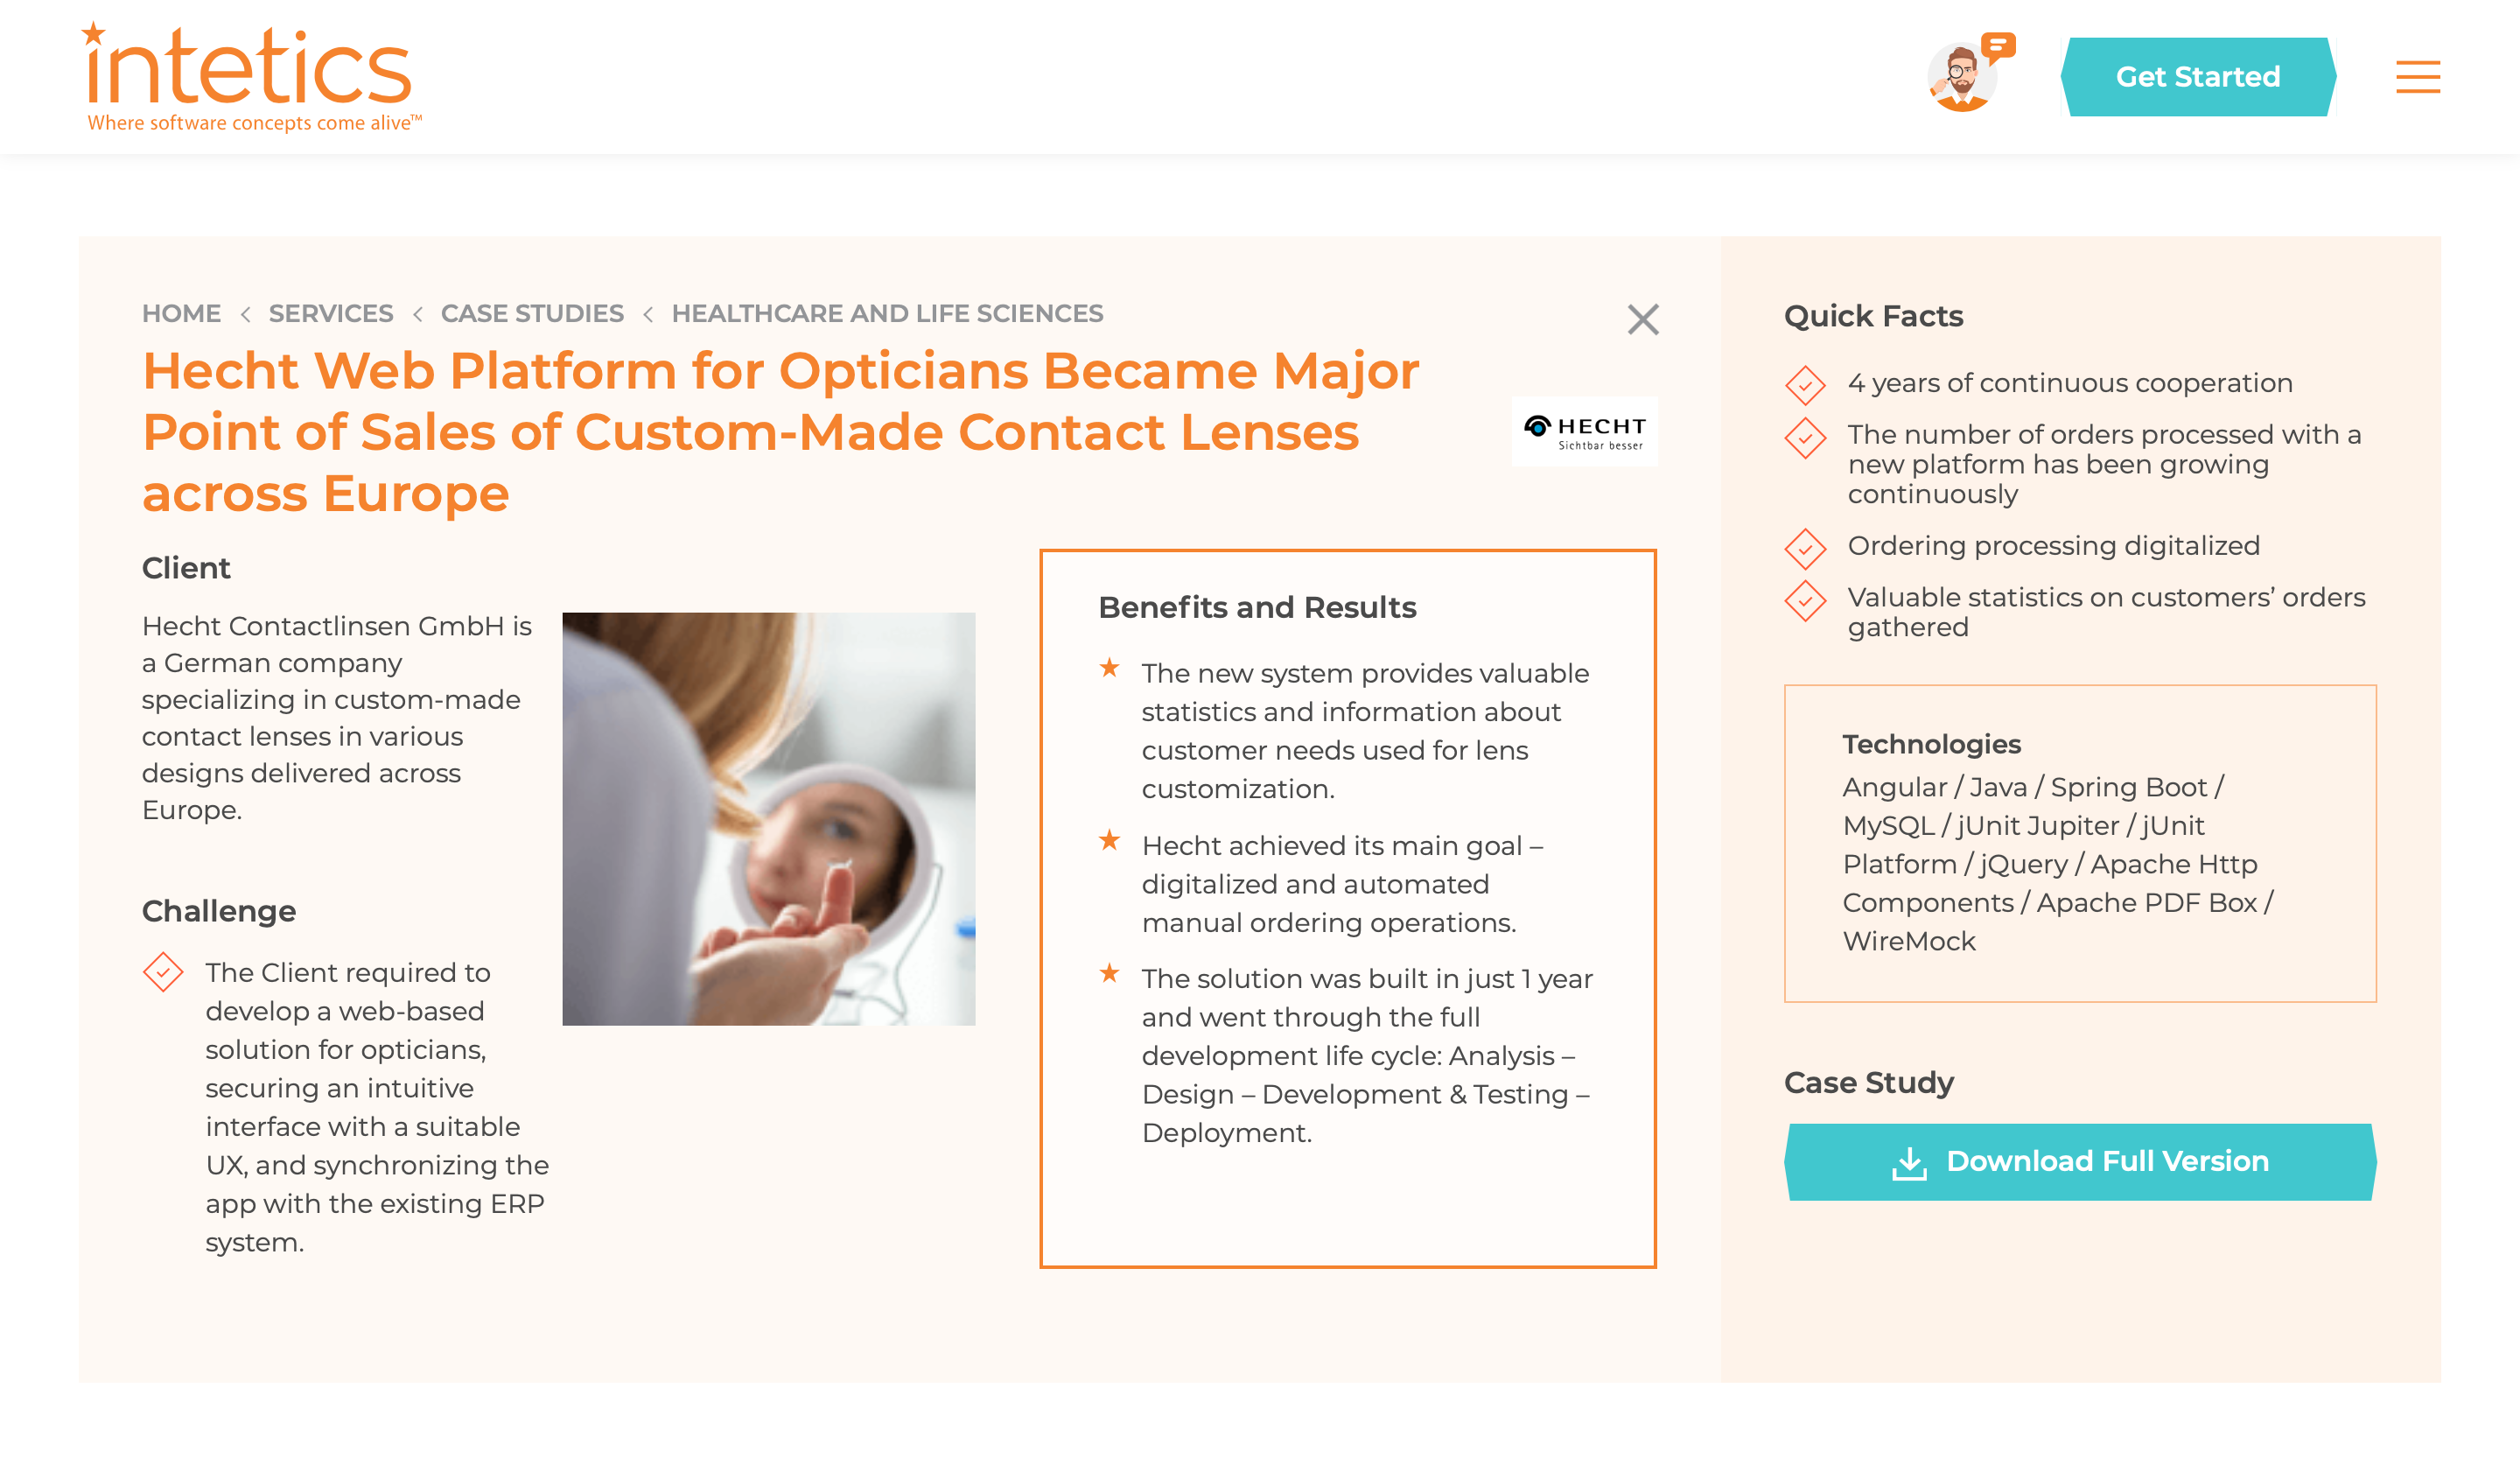 Hecht Web Platform for Opticians Became Major Point of Sales of Custom-Made Contact Lenses across Europe